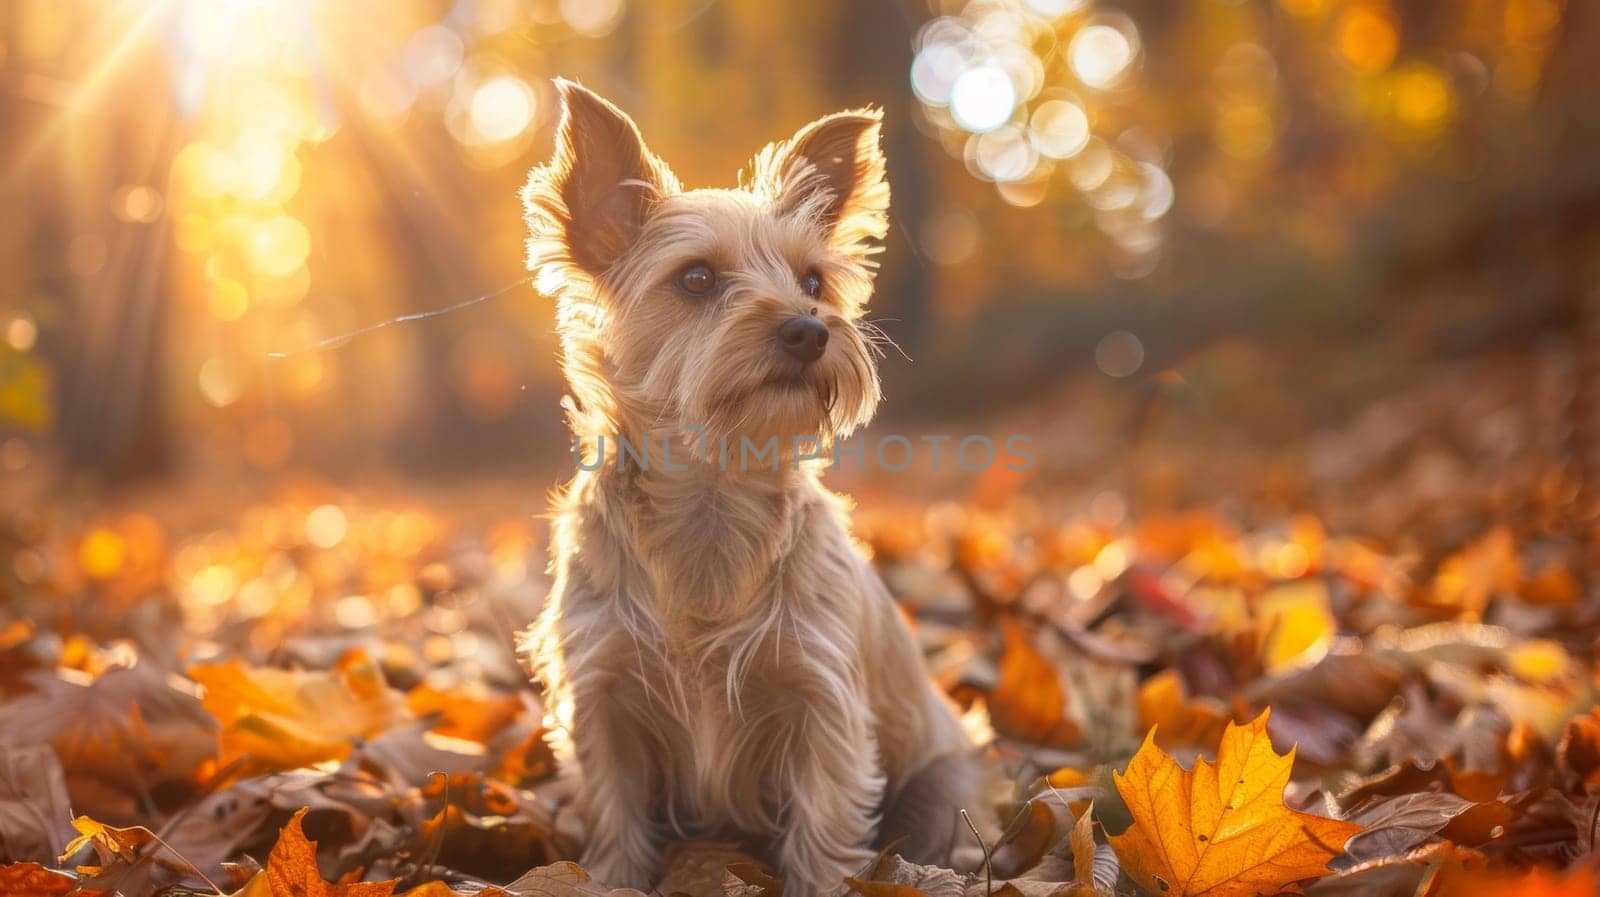 A small dog sitting in a pile of leaves on the ground